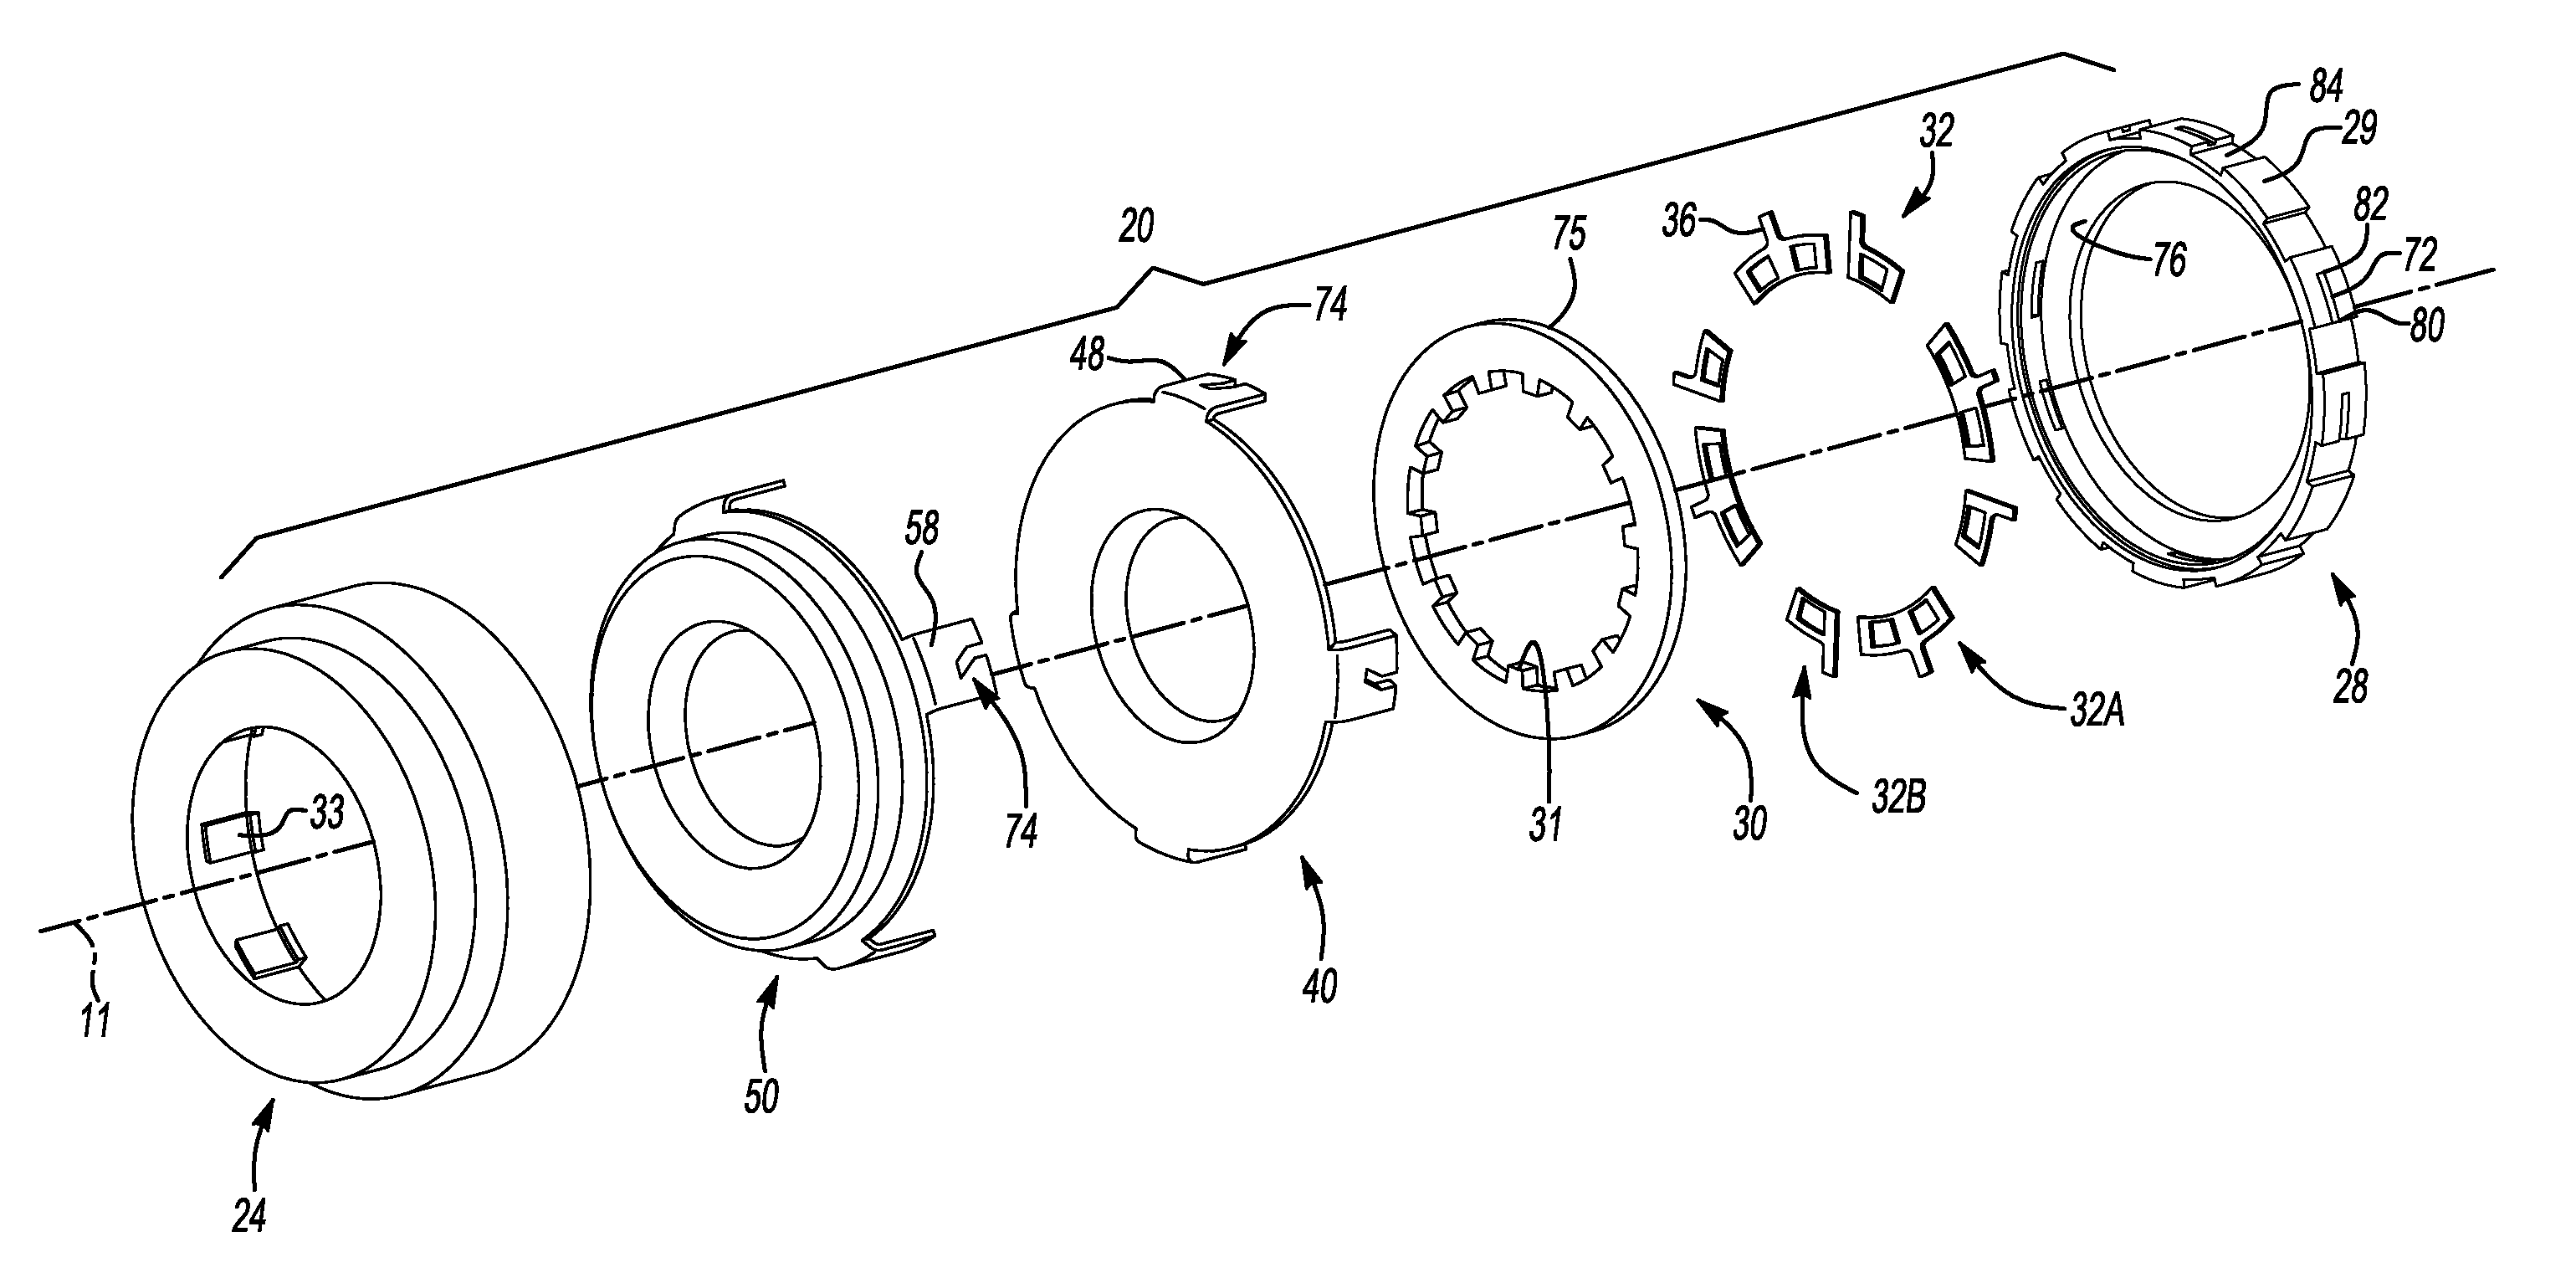 Rotary-type selectable one-way clutch